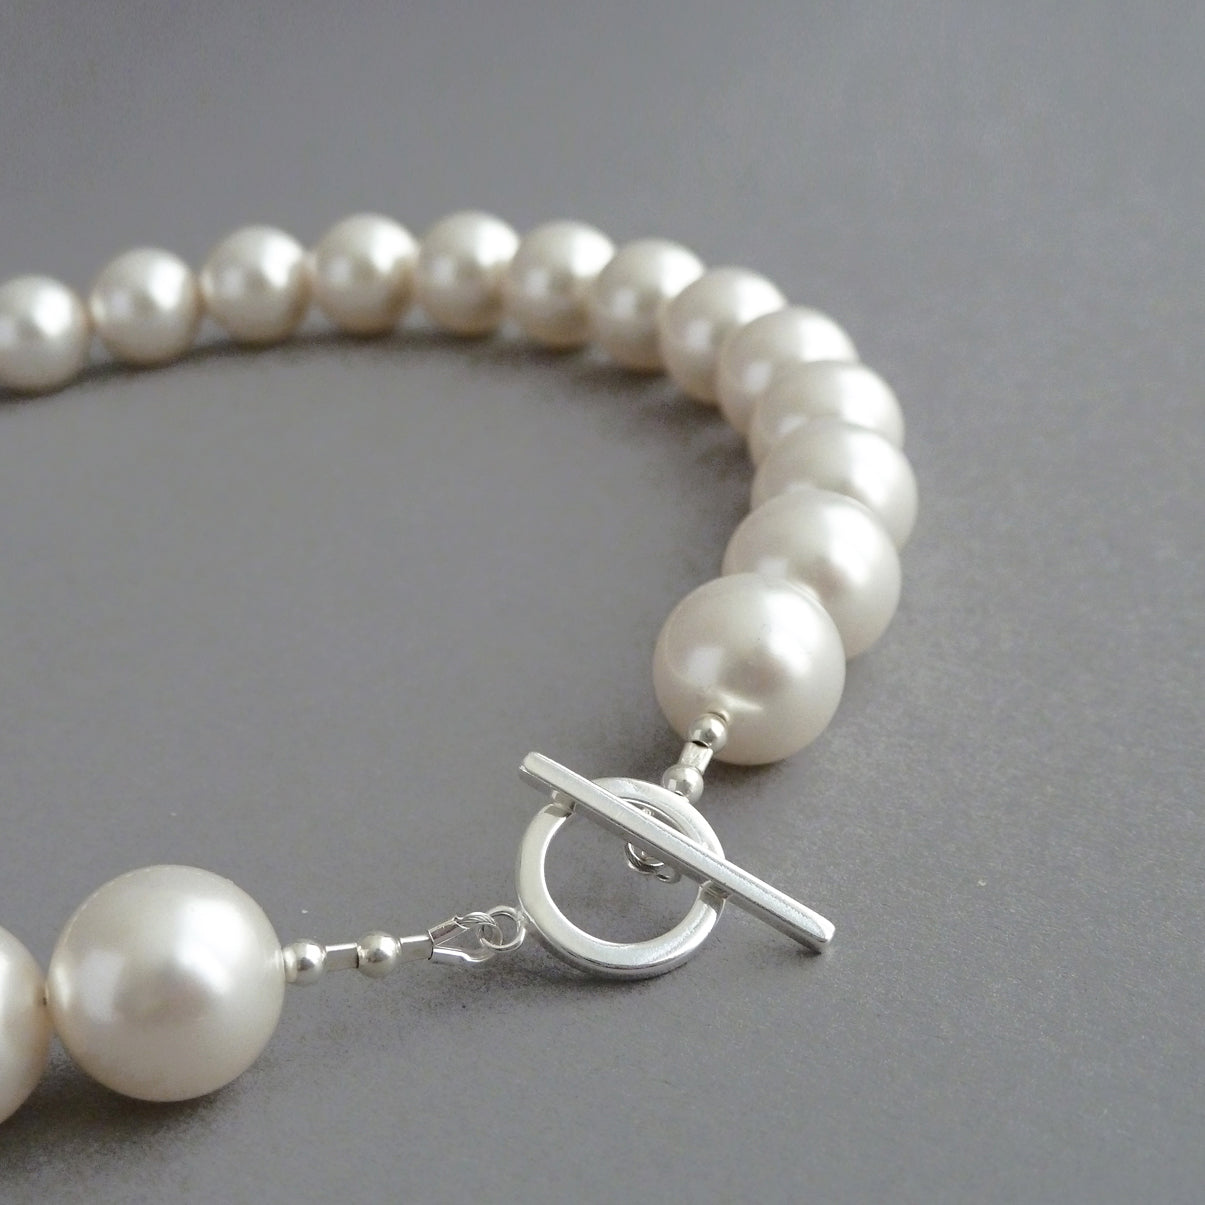 White large pearl necklace for women